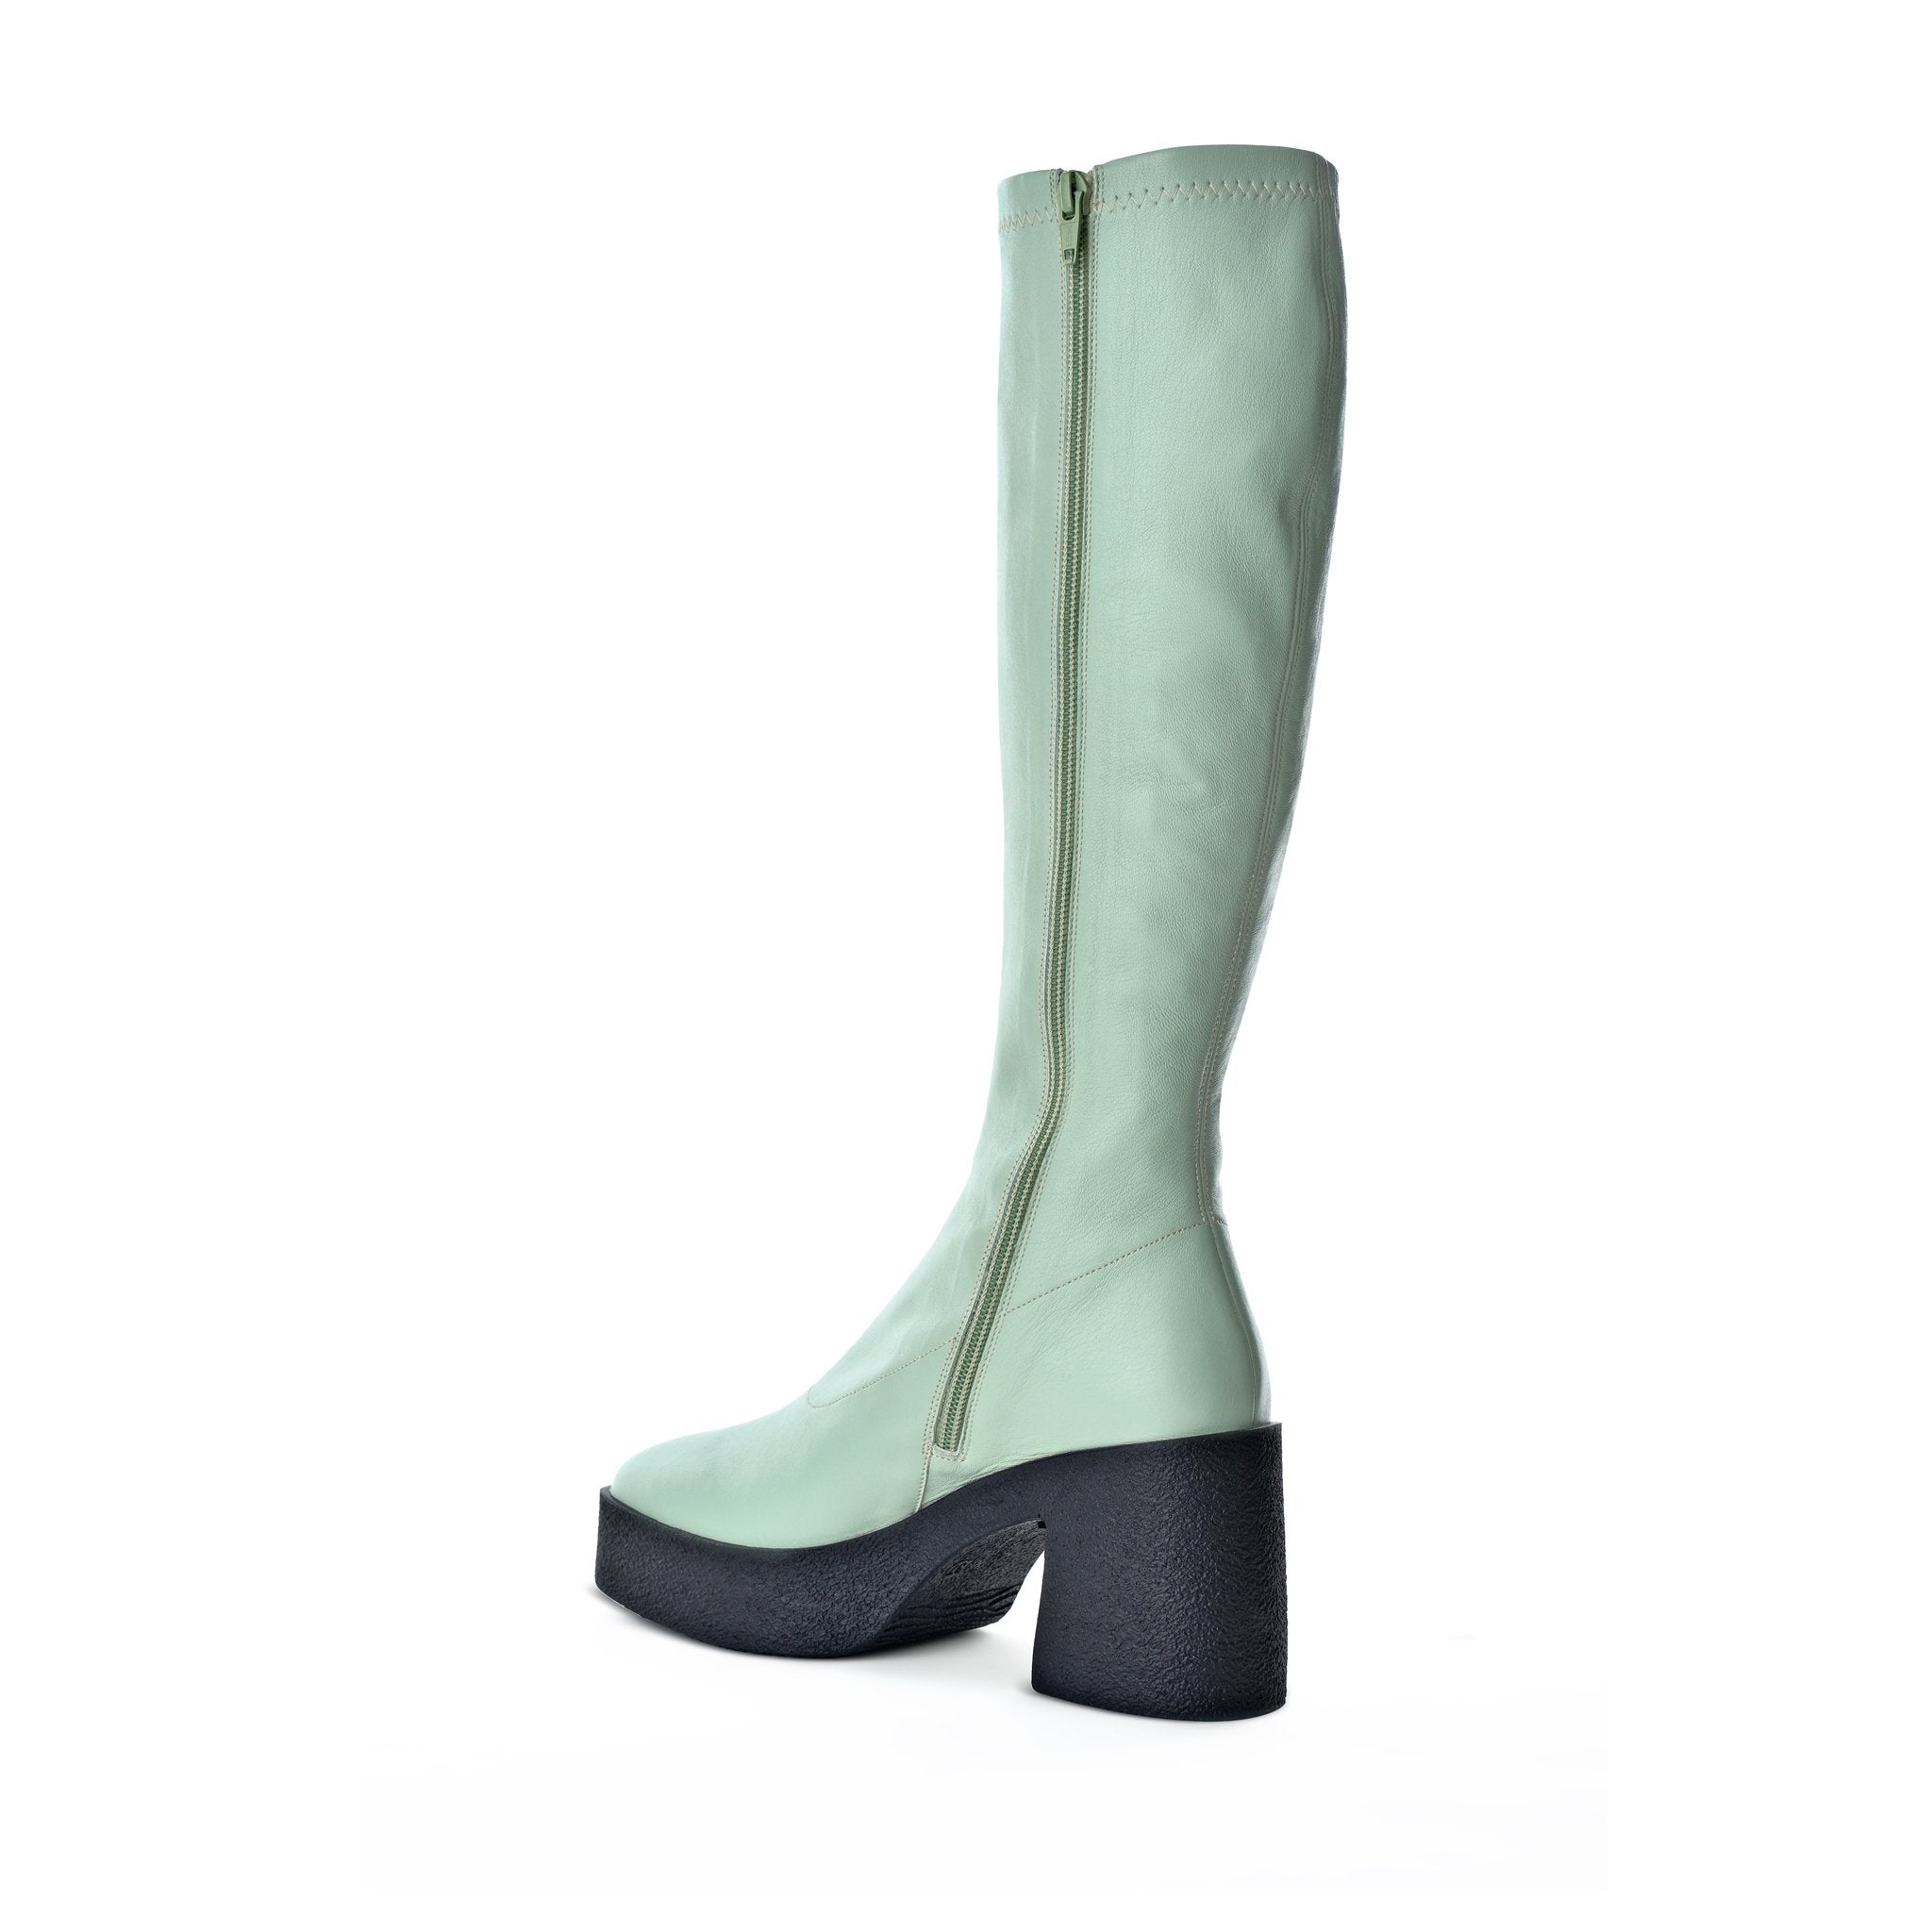 Izumi Pastel Green Stretch Leather Chunky Boots 20077-01-08 - 4